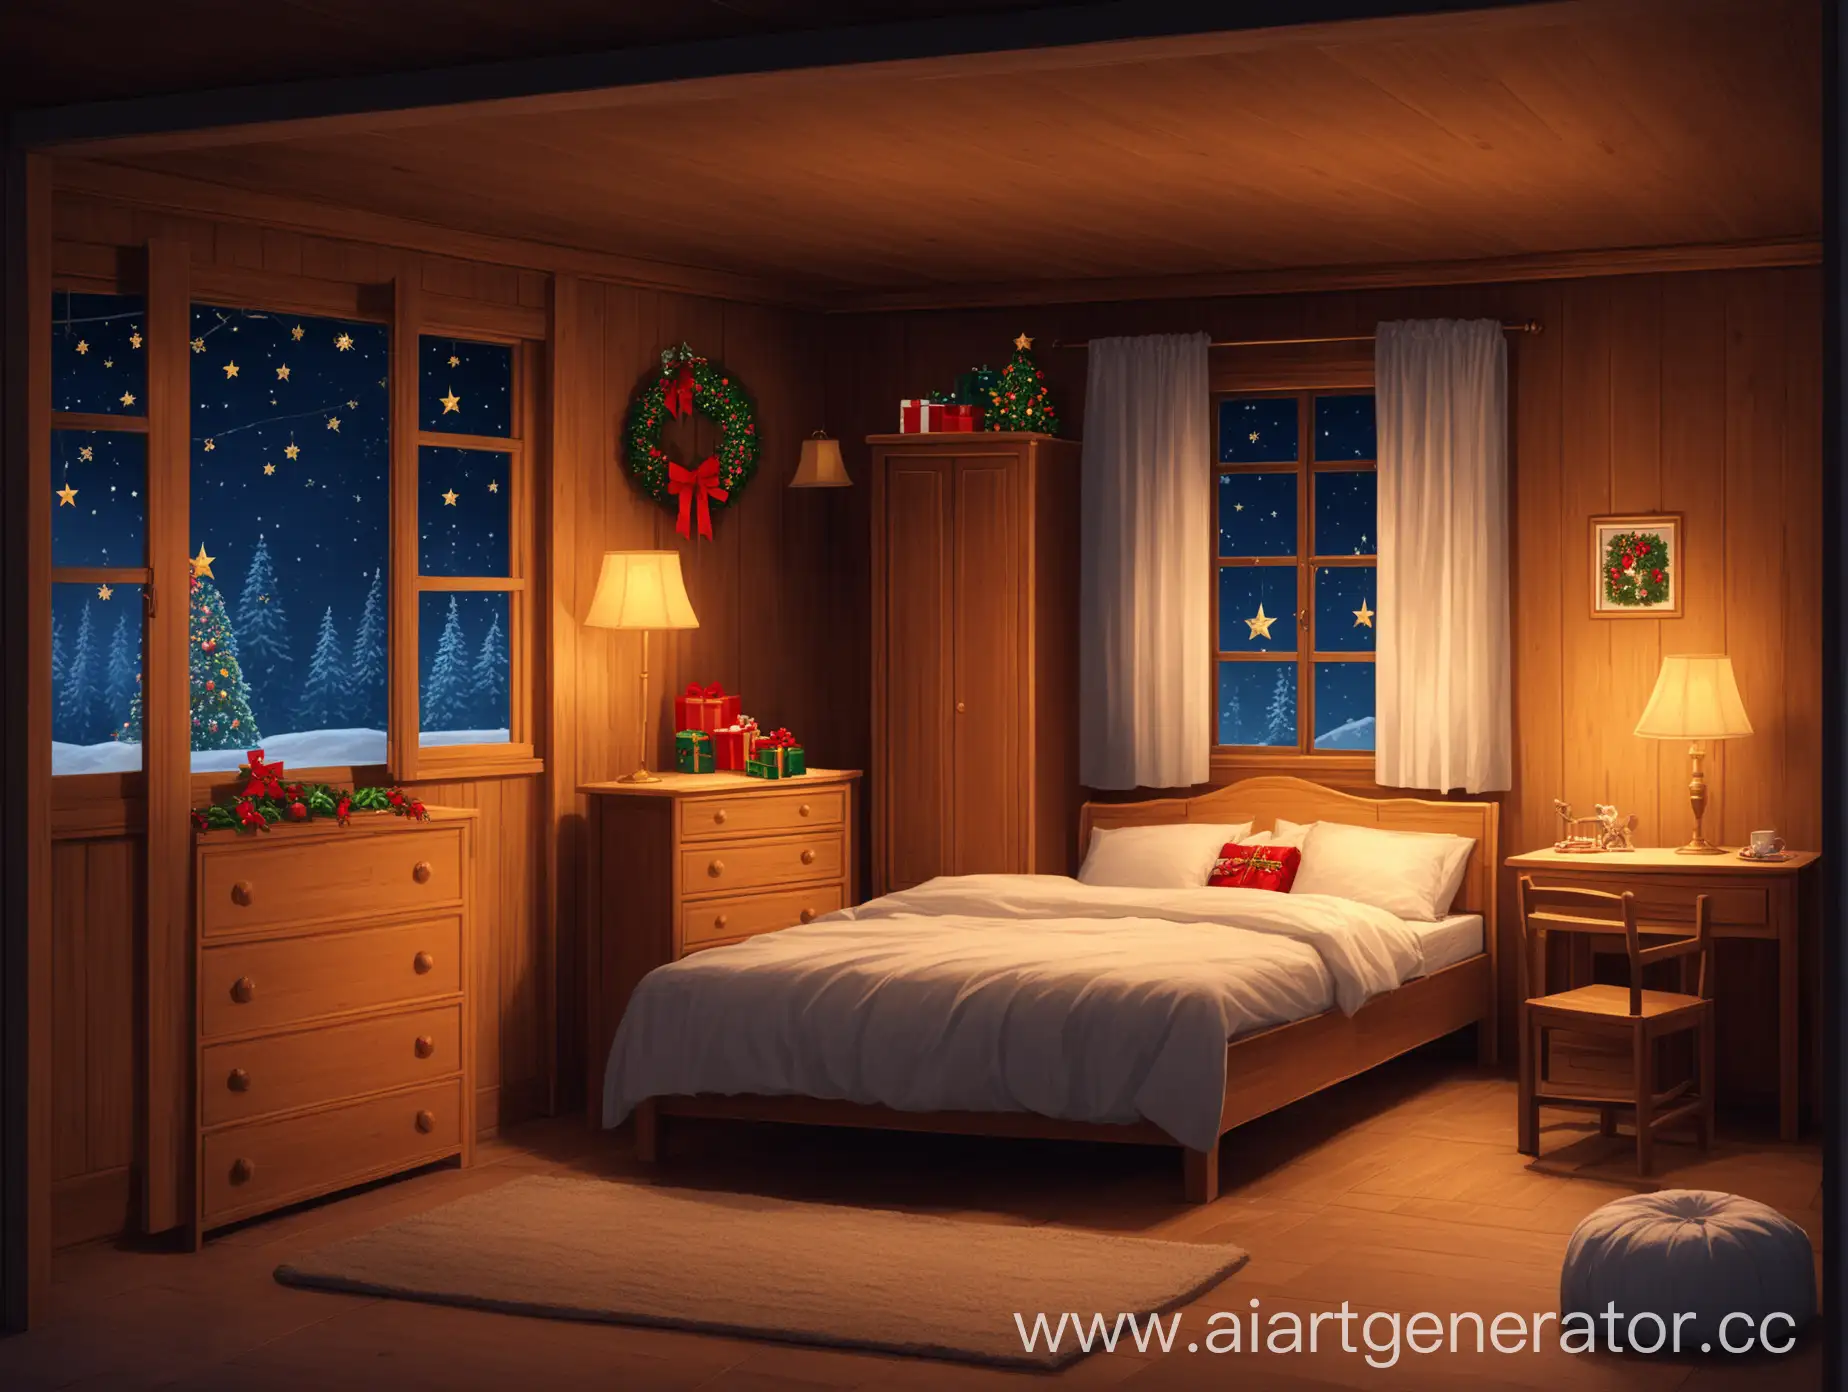 Cozy-Bedroom-at-Night-with-Holiday-Vibes